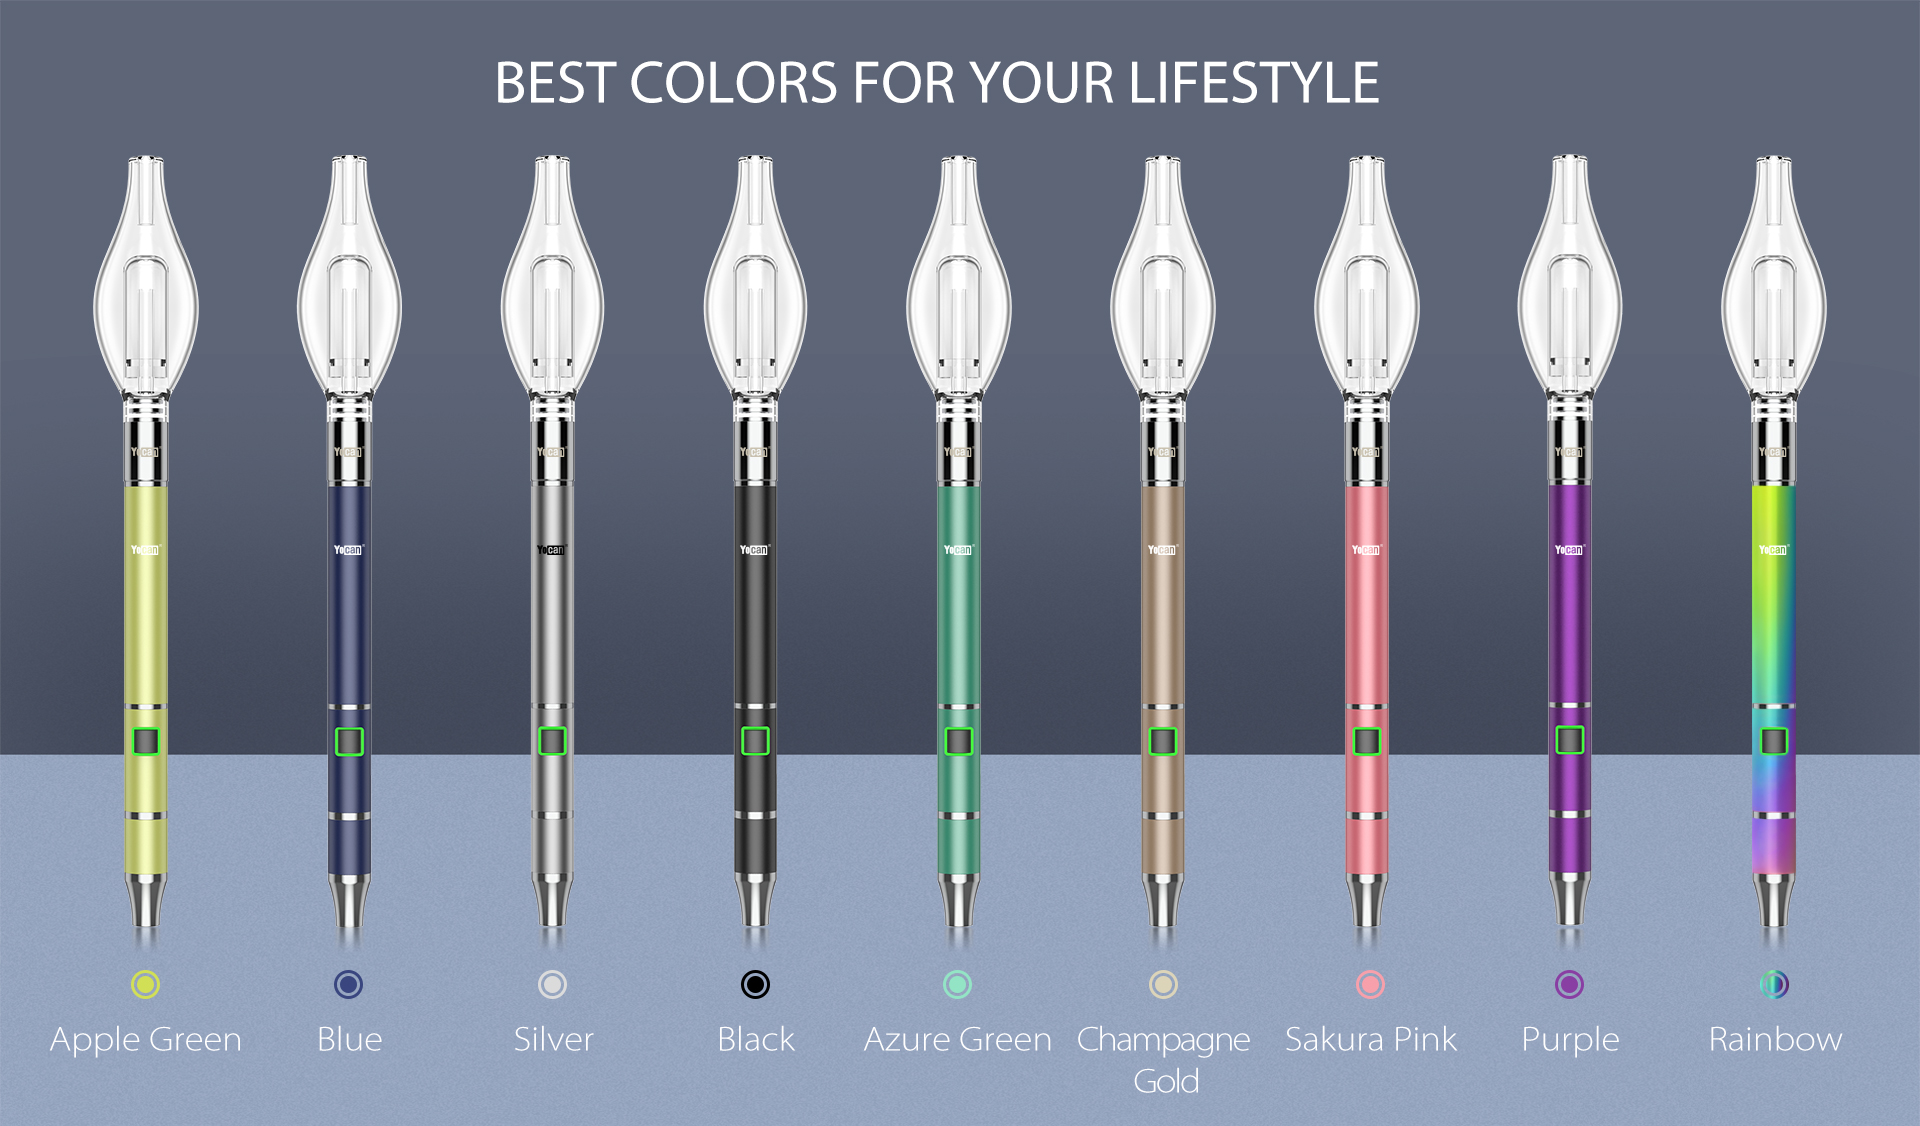 Yocan Dive Mini vaporizer comes with 9 stylish colors.